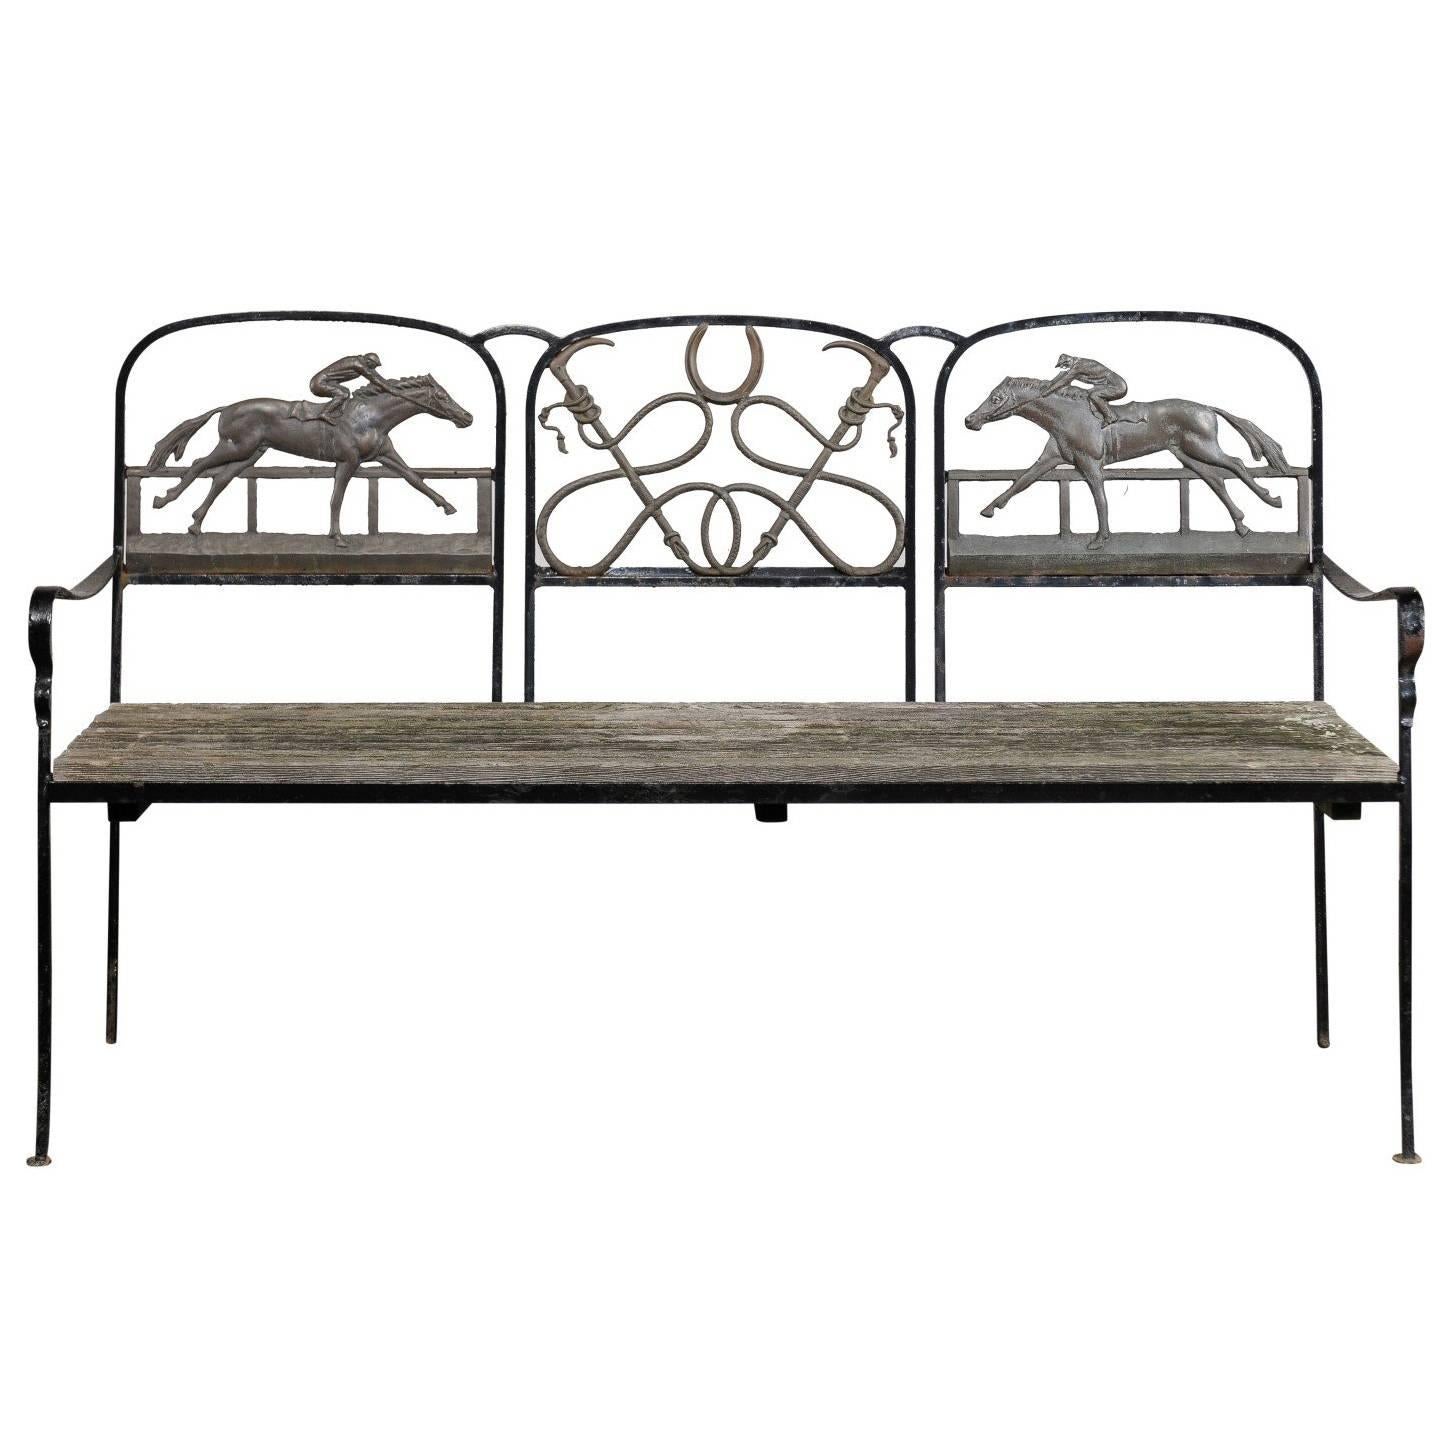 20th Century Iron and Brass Equestrian Bench, Wooden Seat